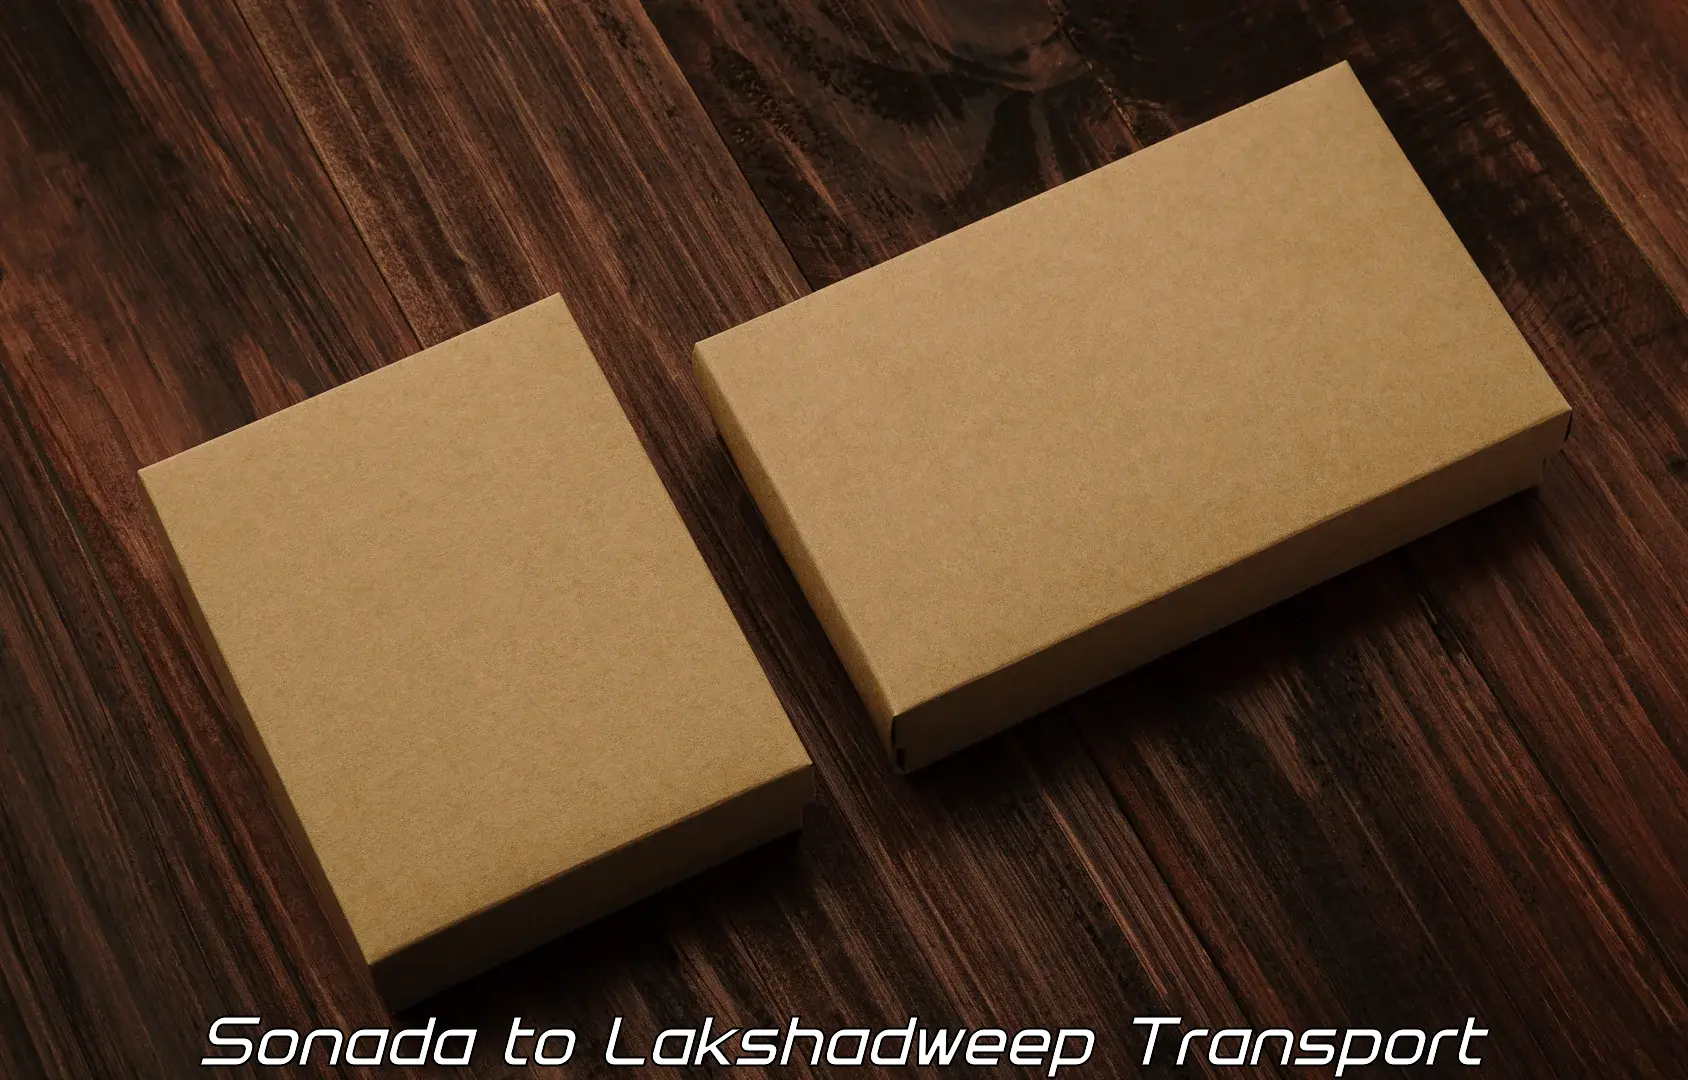 Nearby transport service Sonada to Lakshadweep